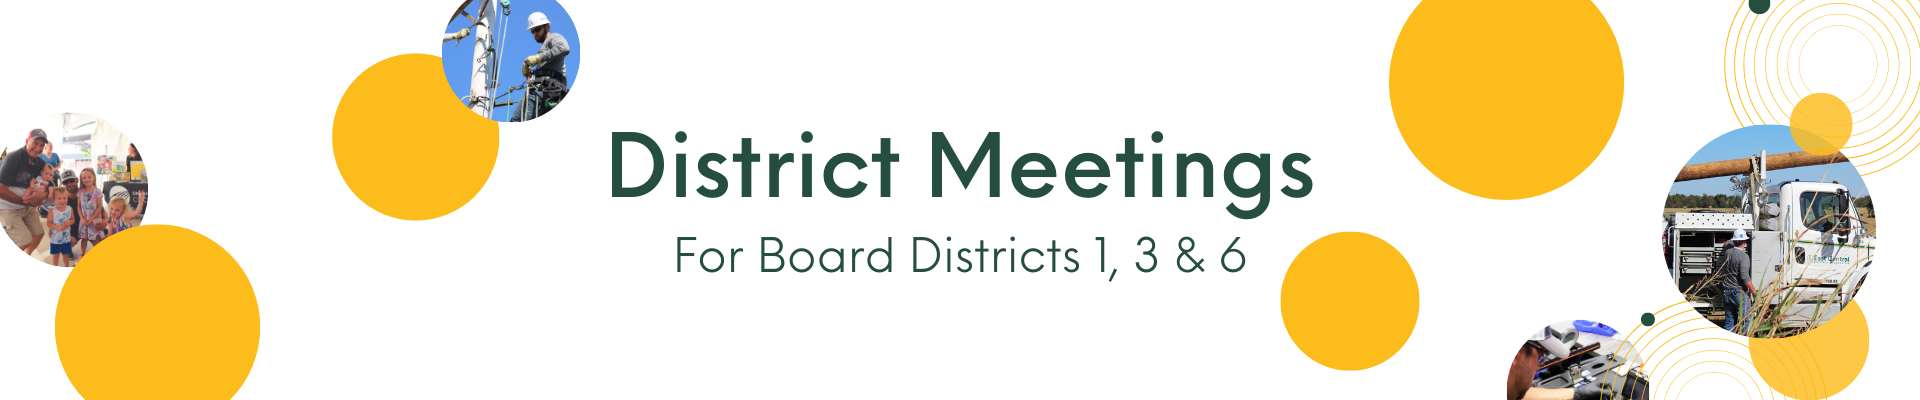 District Meetings for Board Districts 1, 3 & 6